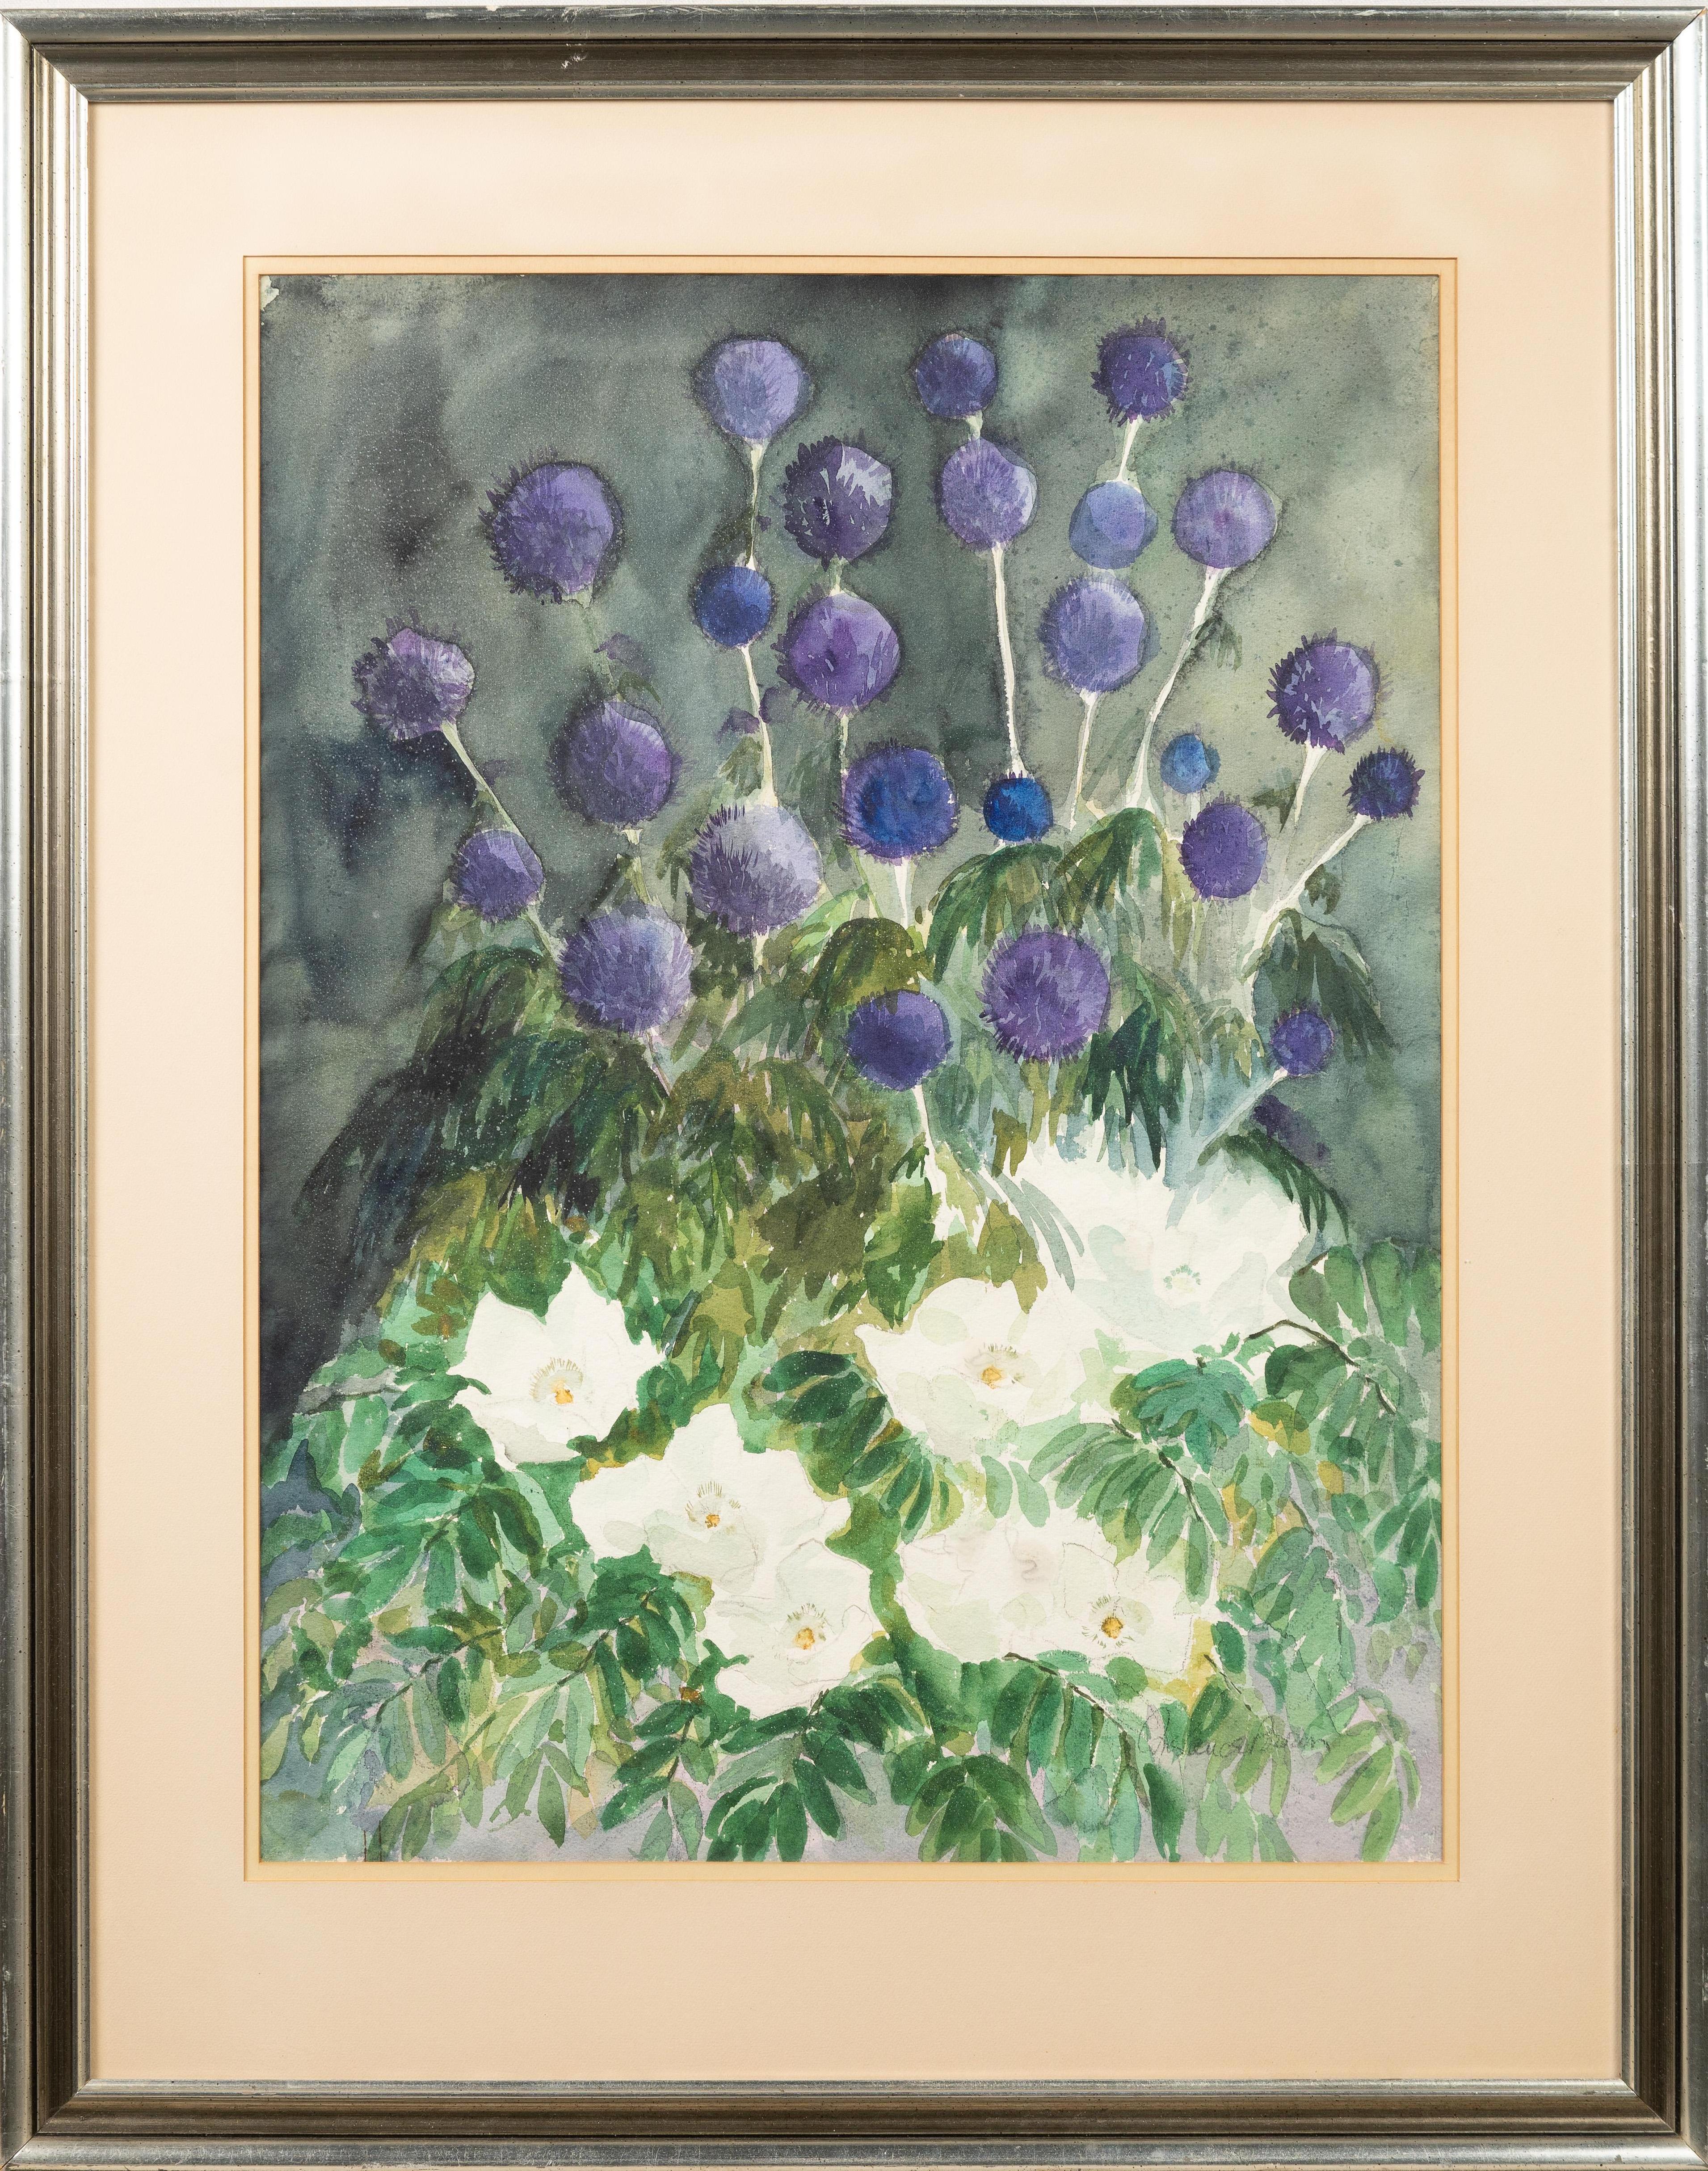 Unknown Still-Life Painting - Vintage Signed Impressionist Flower Still Life Signed Framed Painting